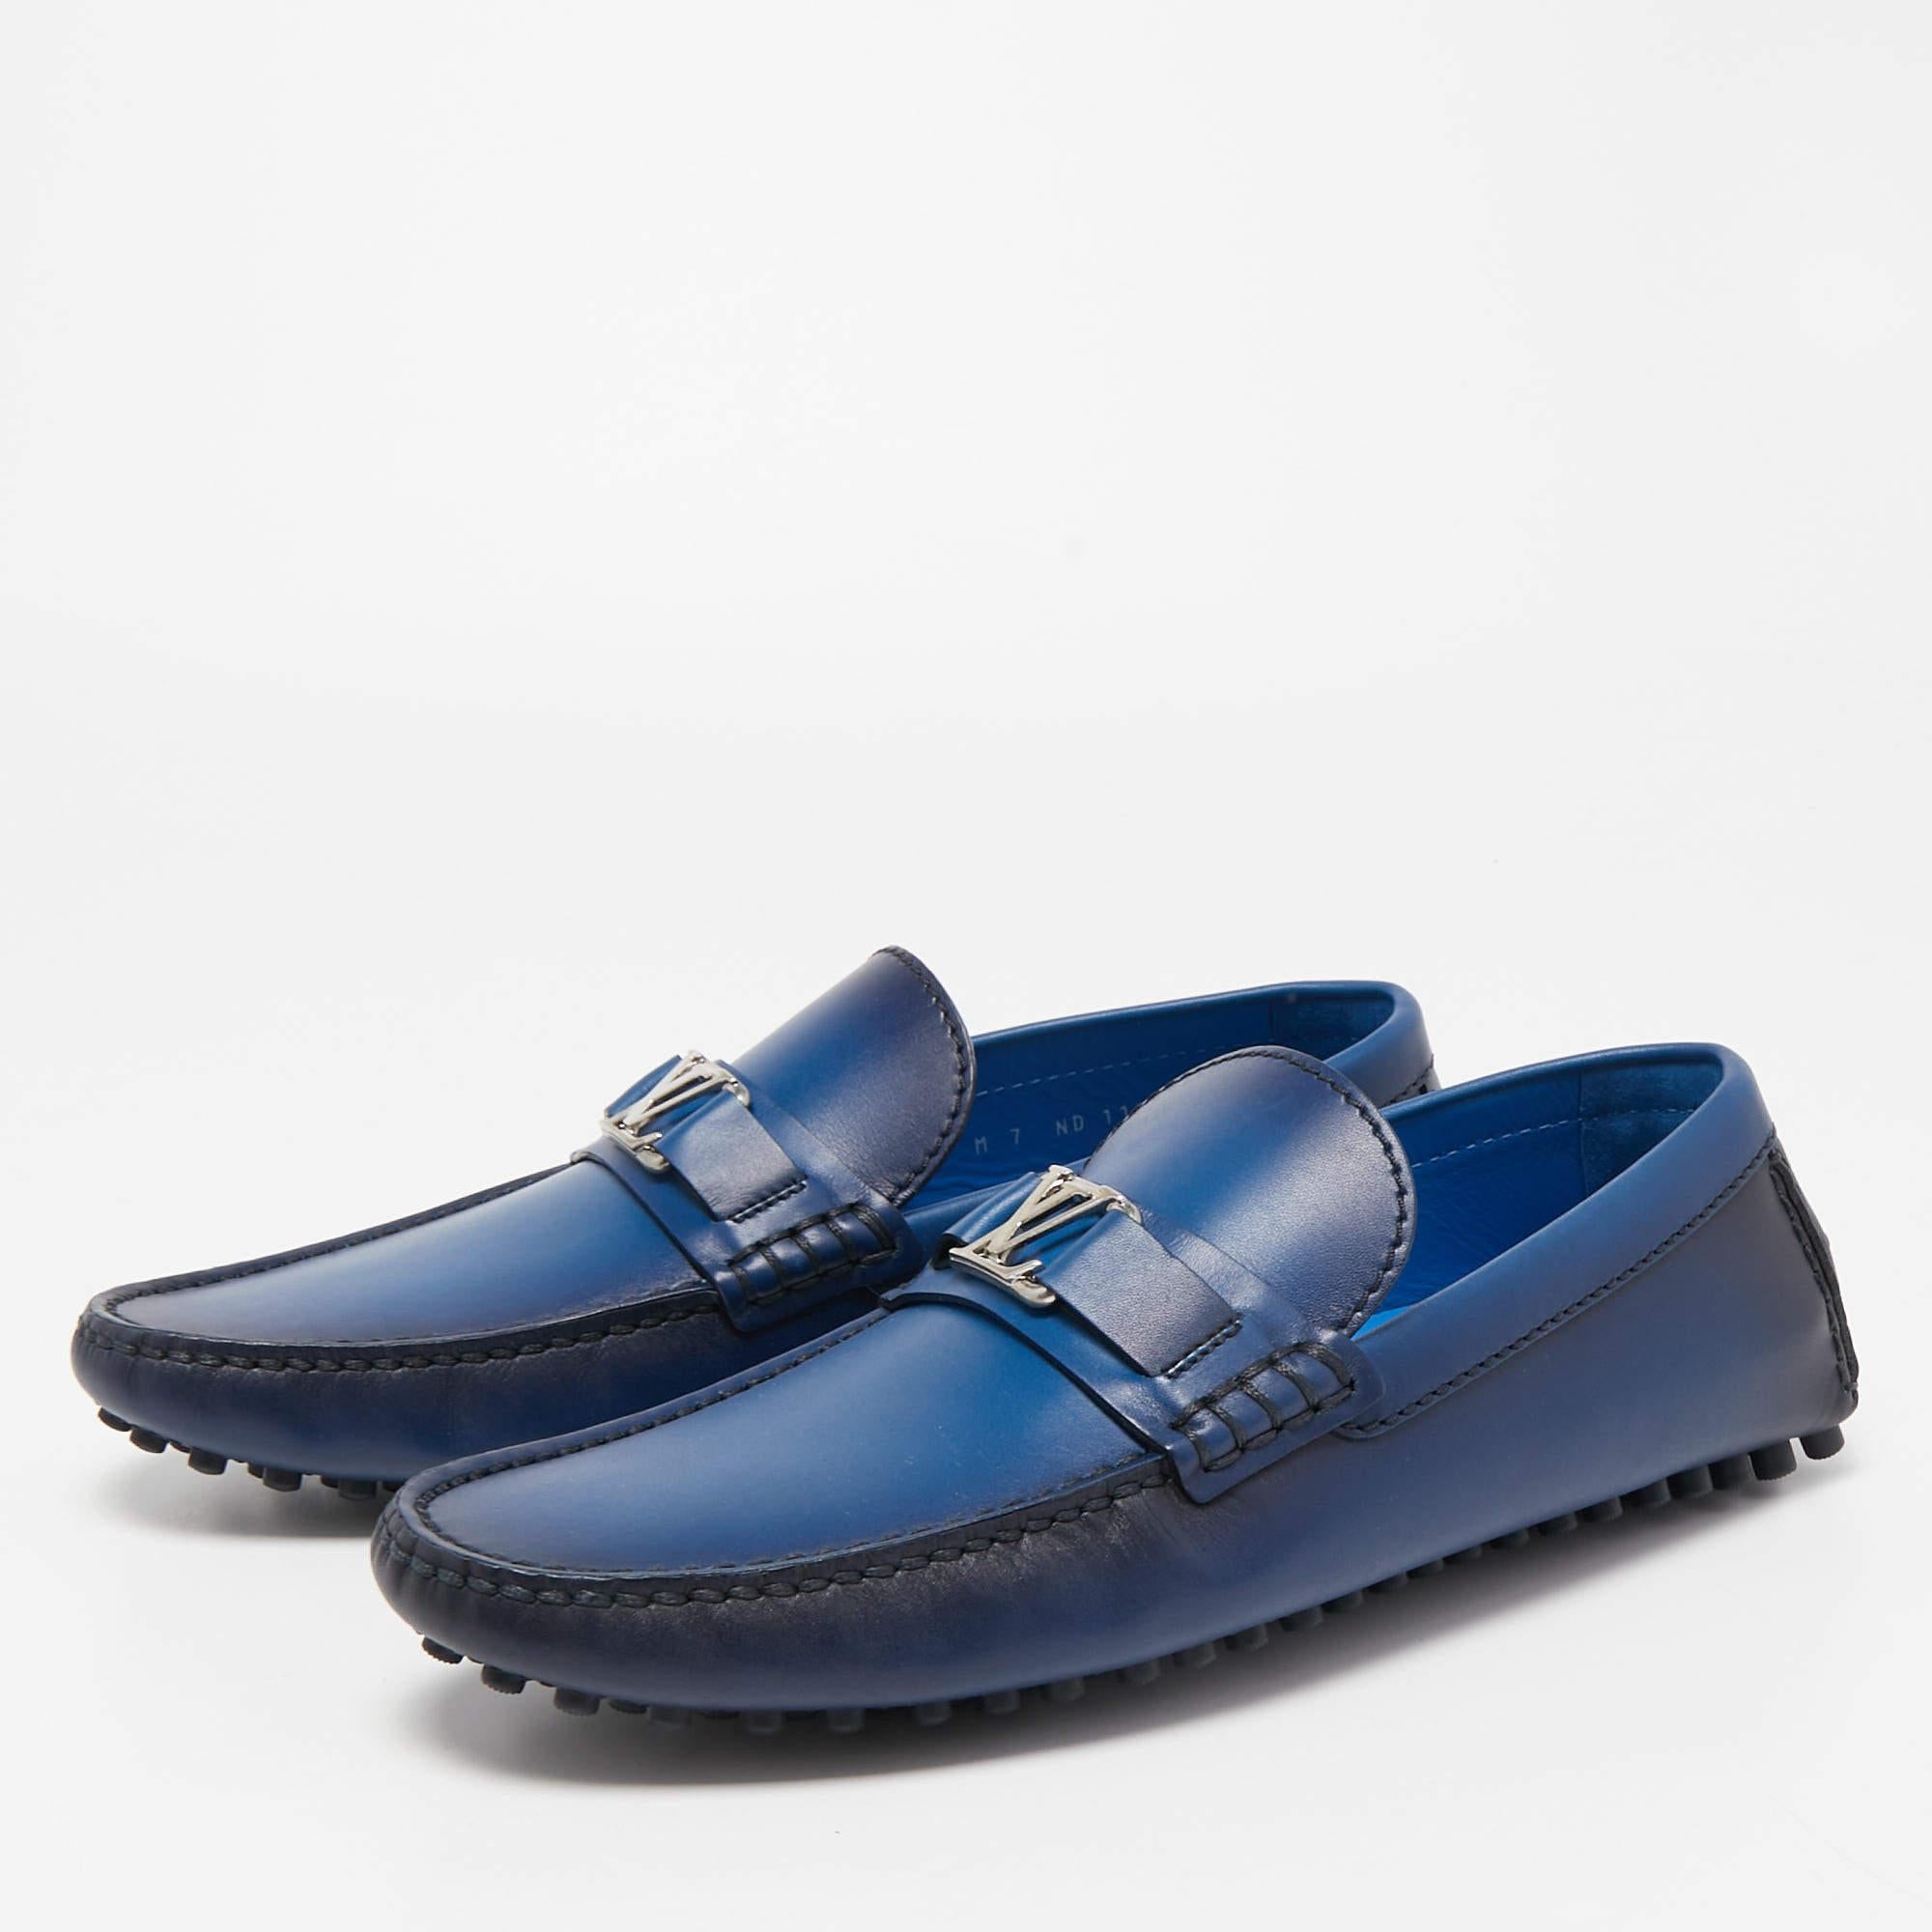 Louis Vuitton Ombre Blue Leather Hockenheim Slip On Loafers Size 41 1